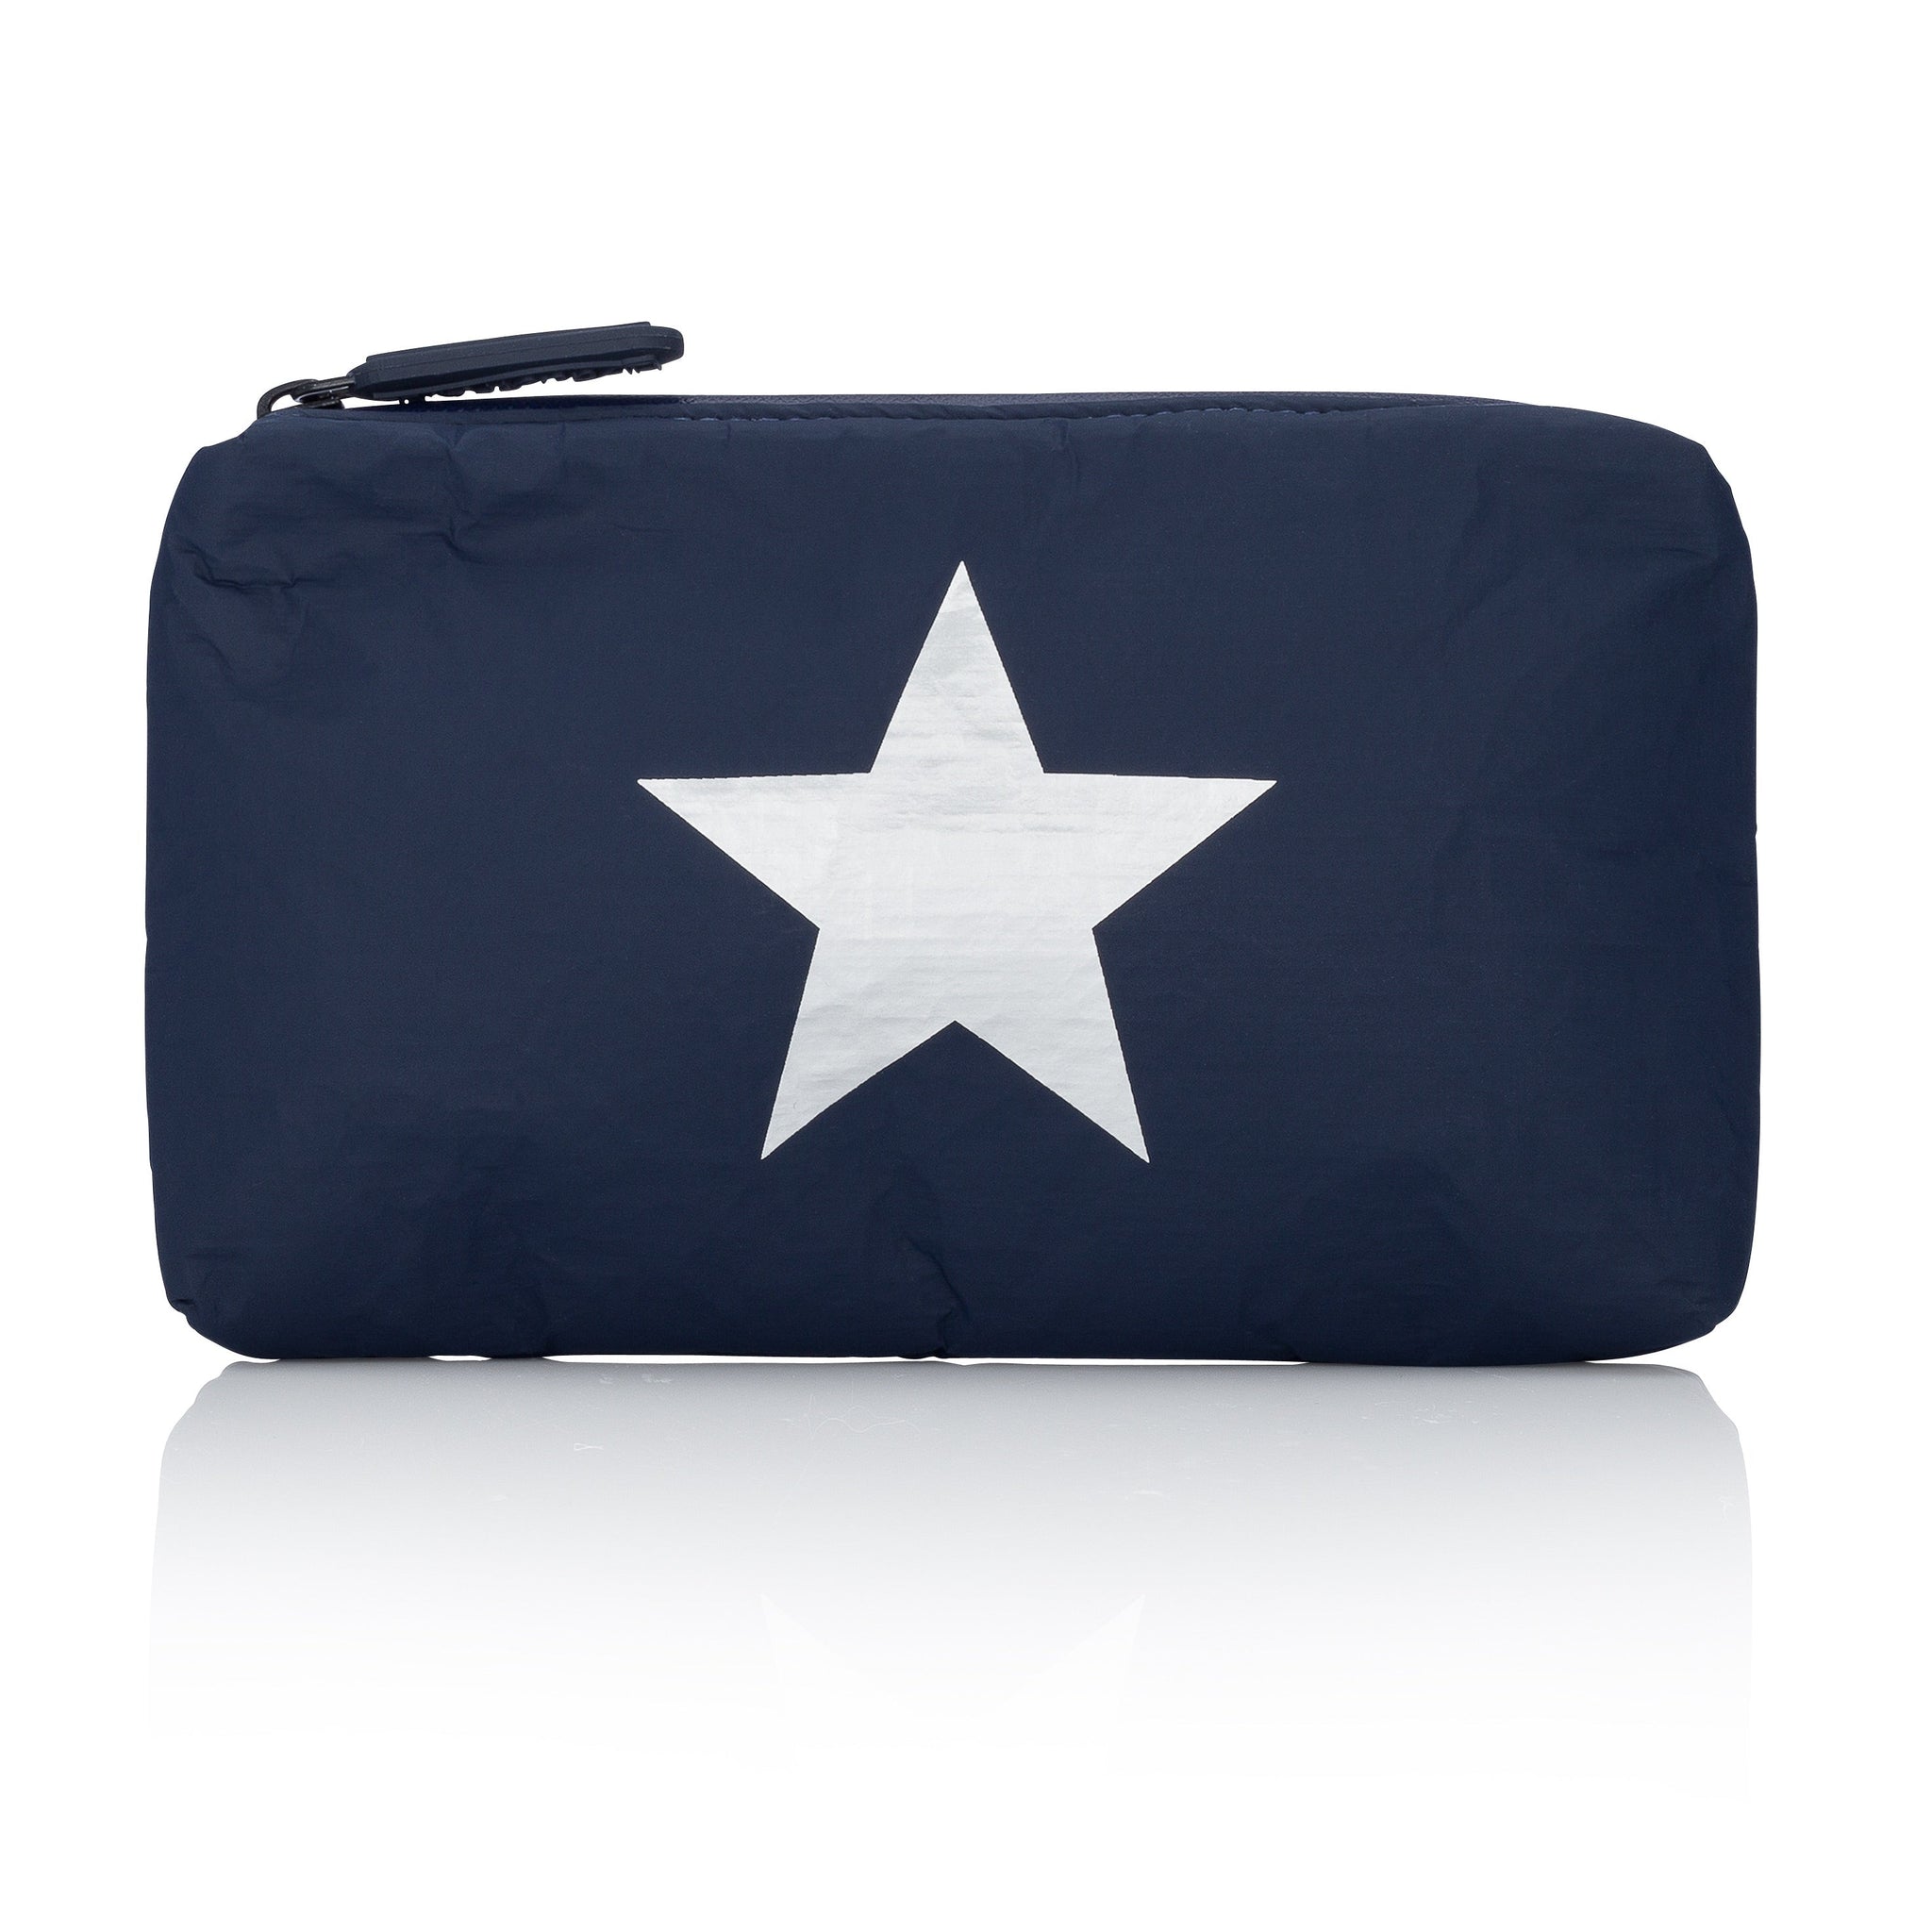 Mini Zipper Pack in Navy with Silver Star